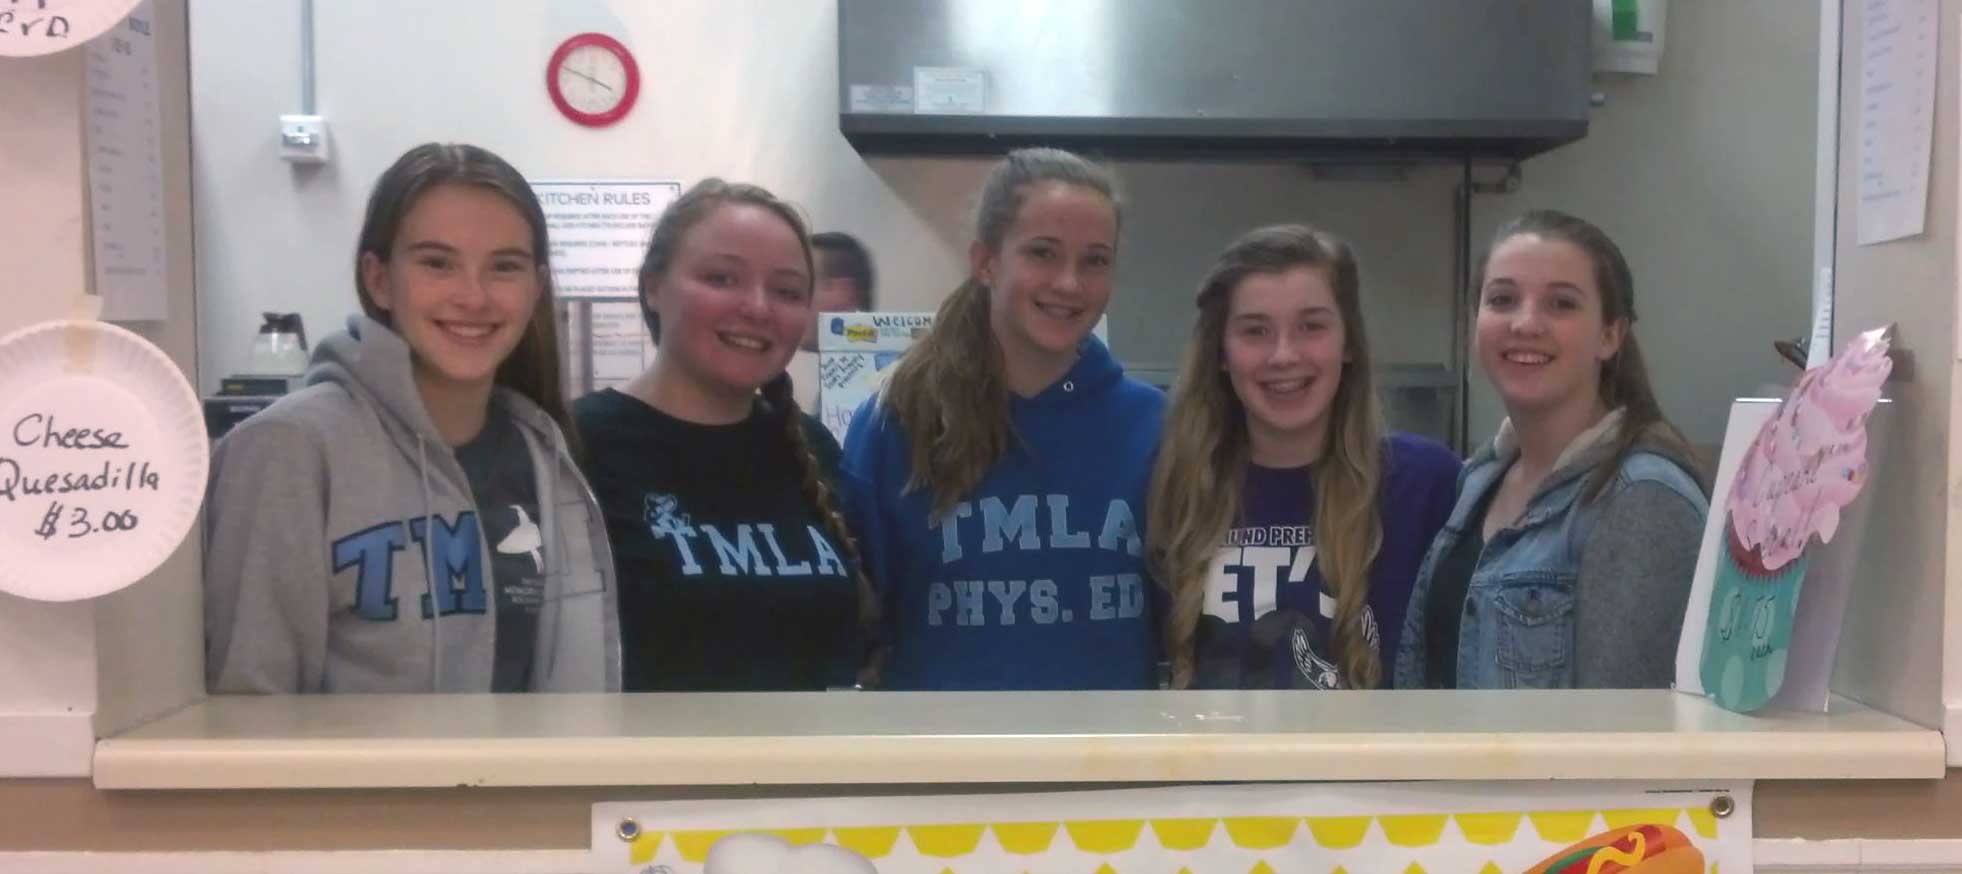 Pictured above are freshwomen returning to help with the St. Francis de Sales CYO program. From The Mary Louis Academy, Jamaica Estates, are Molly and Bridget Brieslen and Katilin Neiswenter; representing St. Edmund Prep, Sheepshead Bay, are Devan Gavigan and Jenna Lonnborg.